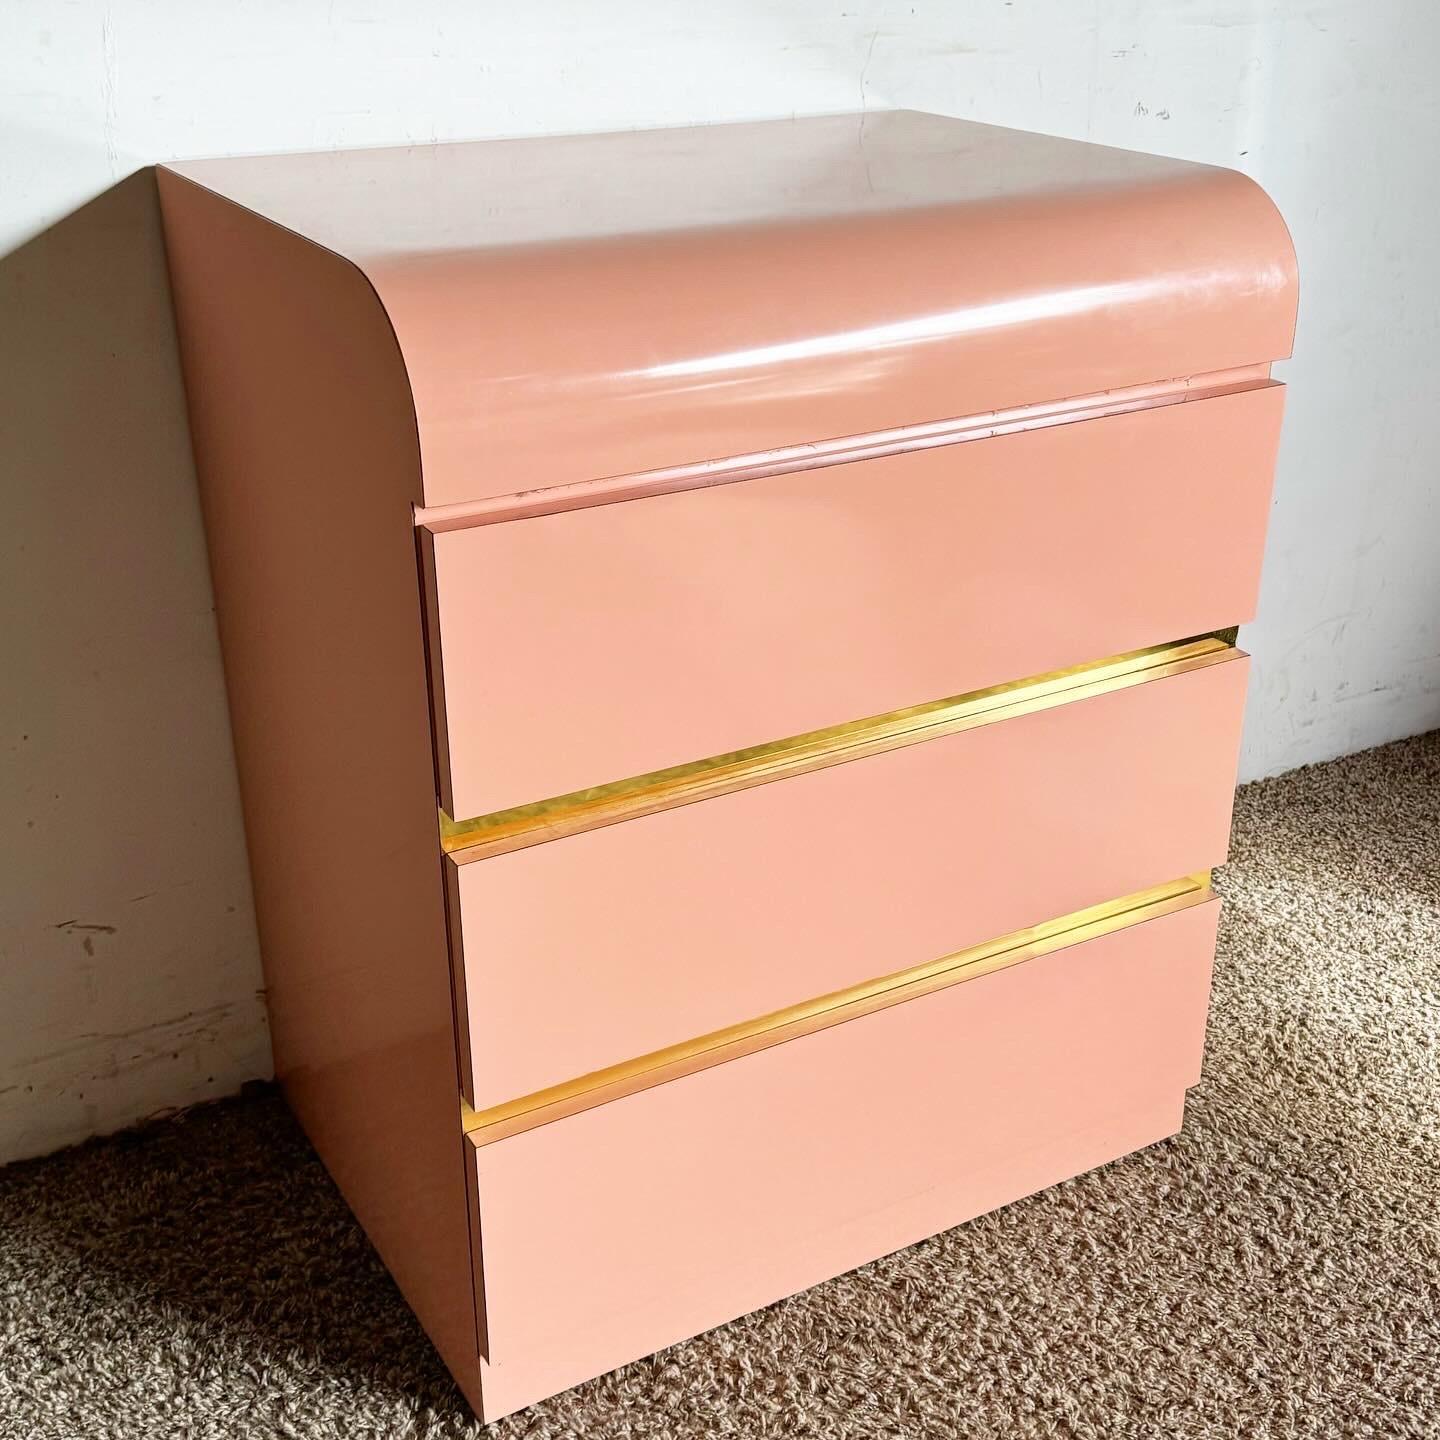 Add a vibrant and contemporary touch to your bedroom with the Postmodern Pink Lacquer Laminate and Gold Waterfall Nightstand/Commode. This piece features a sleek waterfall design in a striking pink hue, beautifully accented with luxurious gold. Its